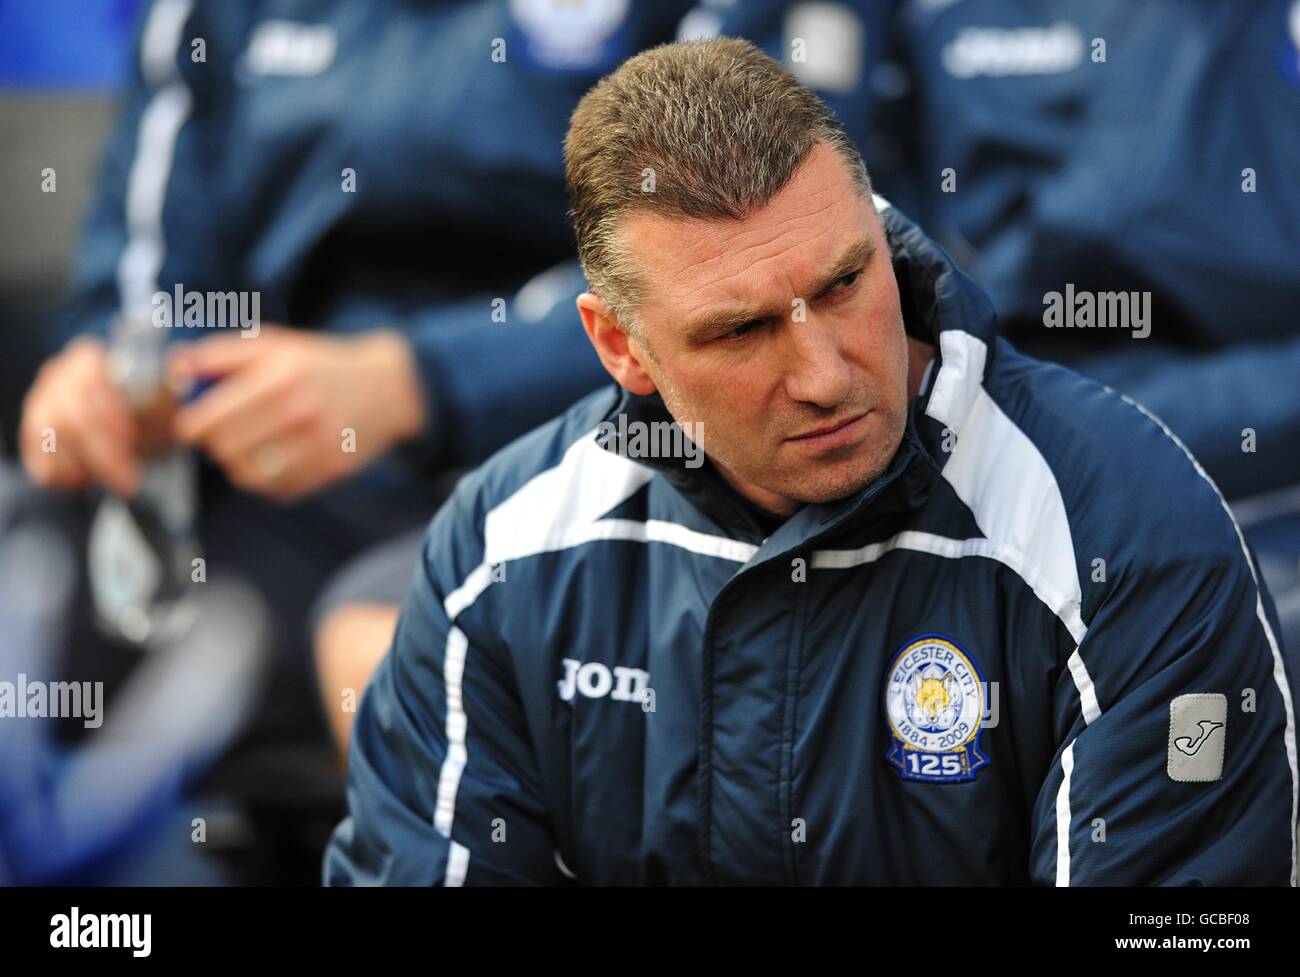 Fußball - Coca-Cola Football League Championship - Leicester City / Nottingham Forest - The Walkers Stadium. Nigel Pearson, Leicester City Manager Stockfoto